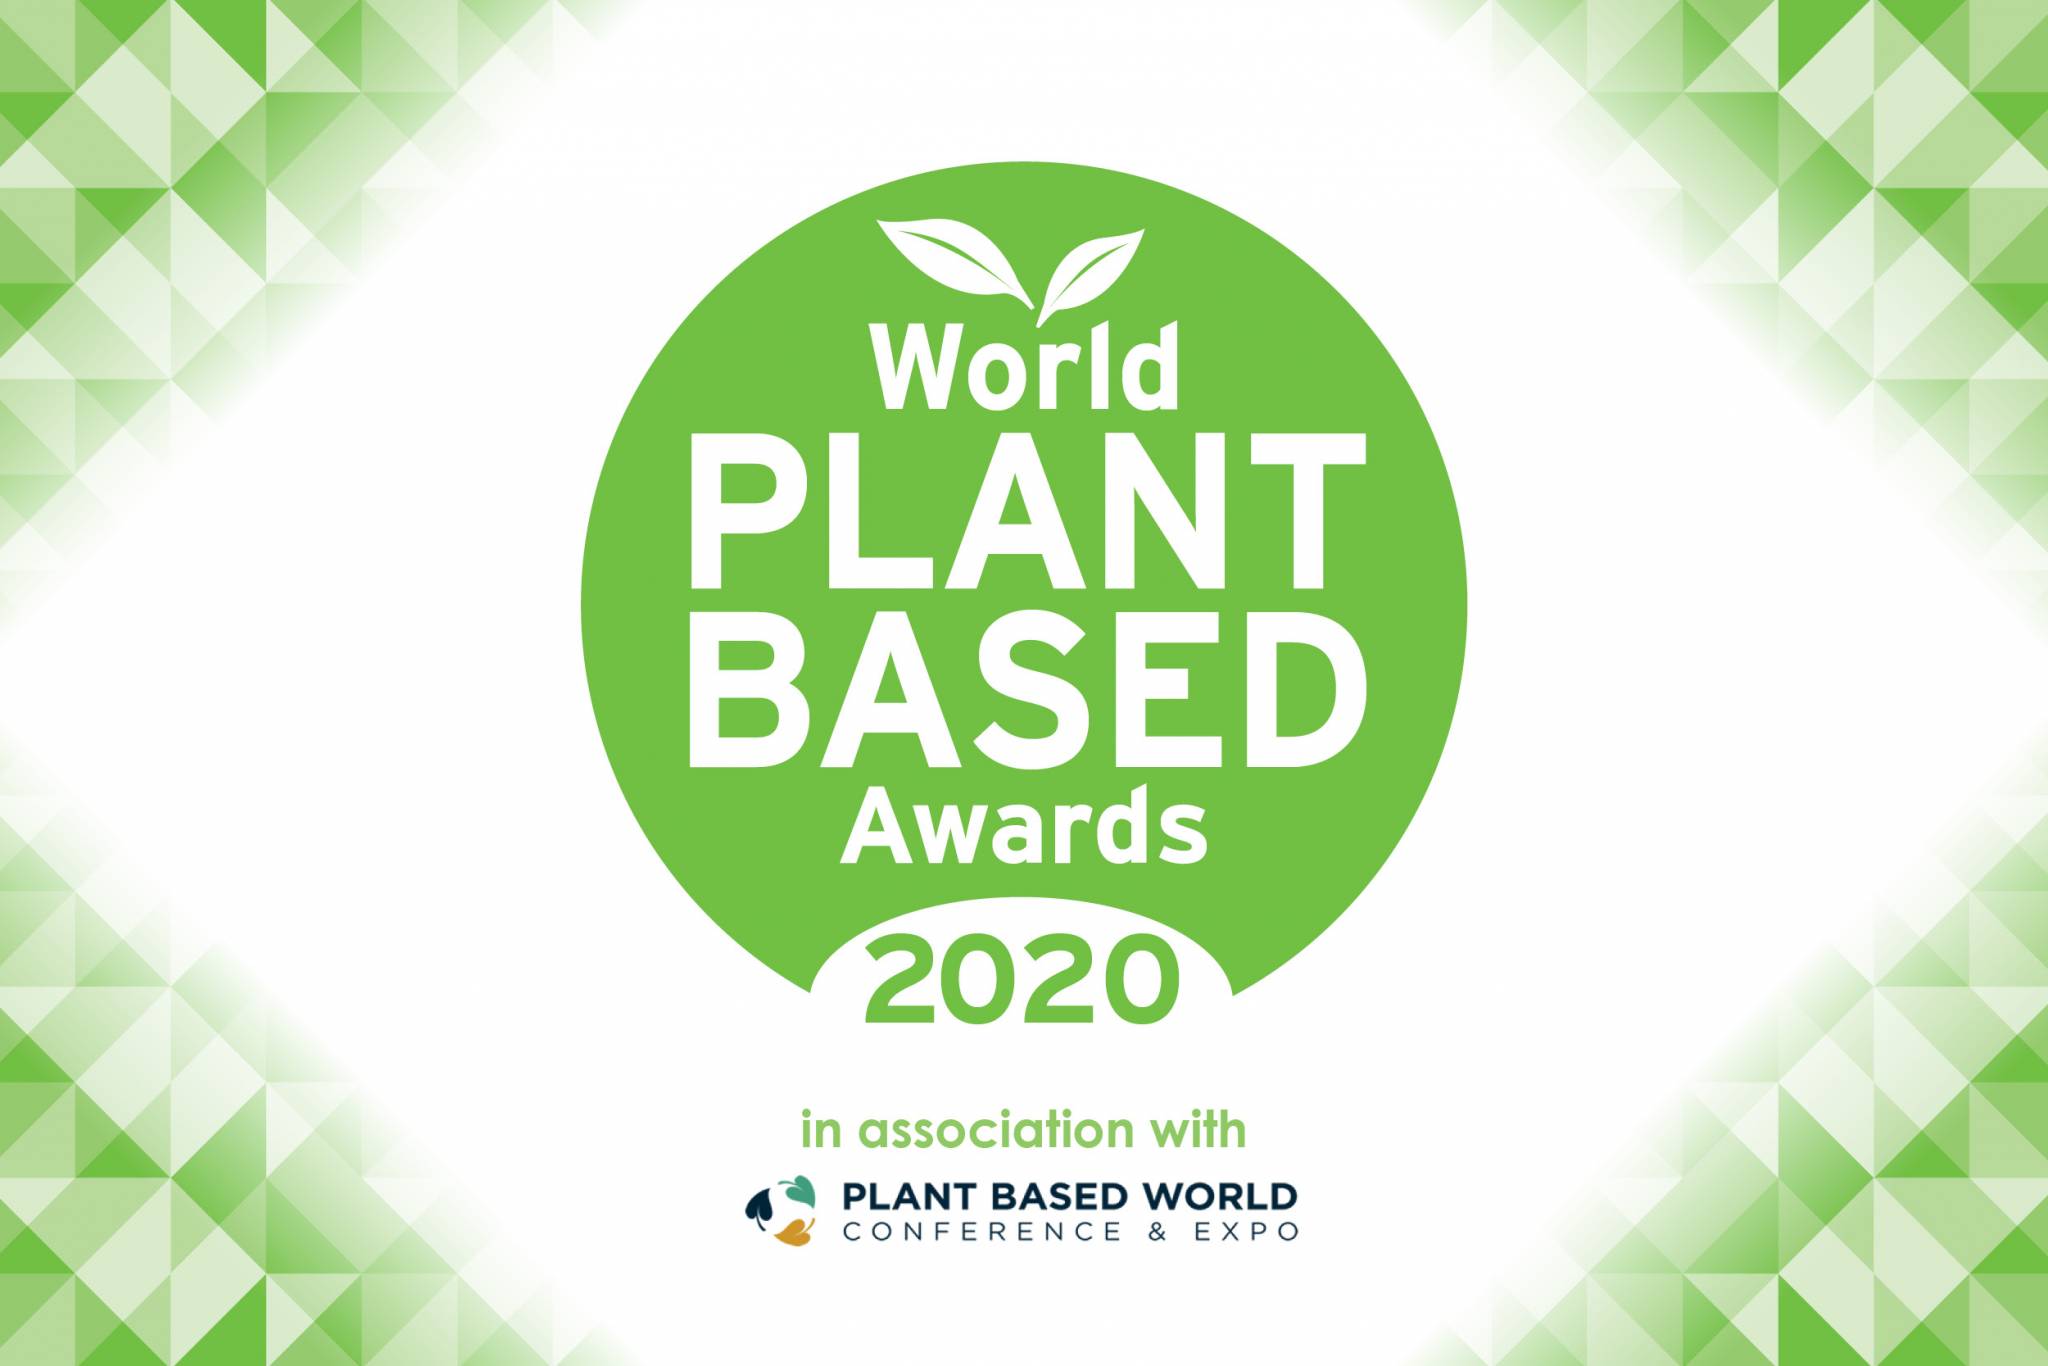 World Plant-Based Awards 2020 now open for entries